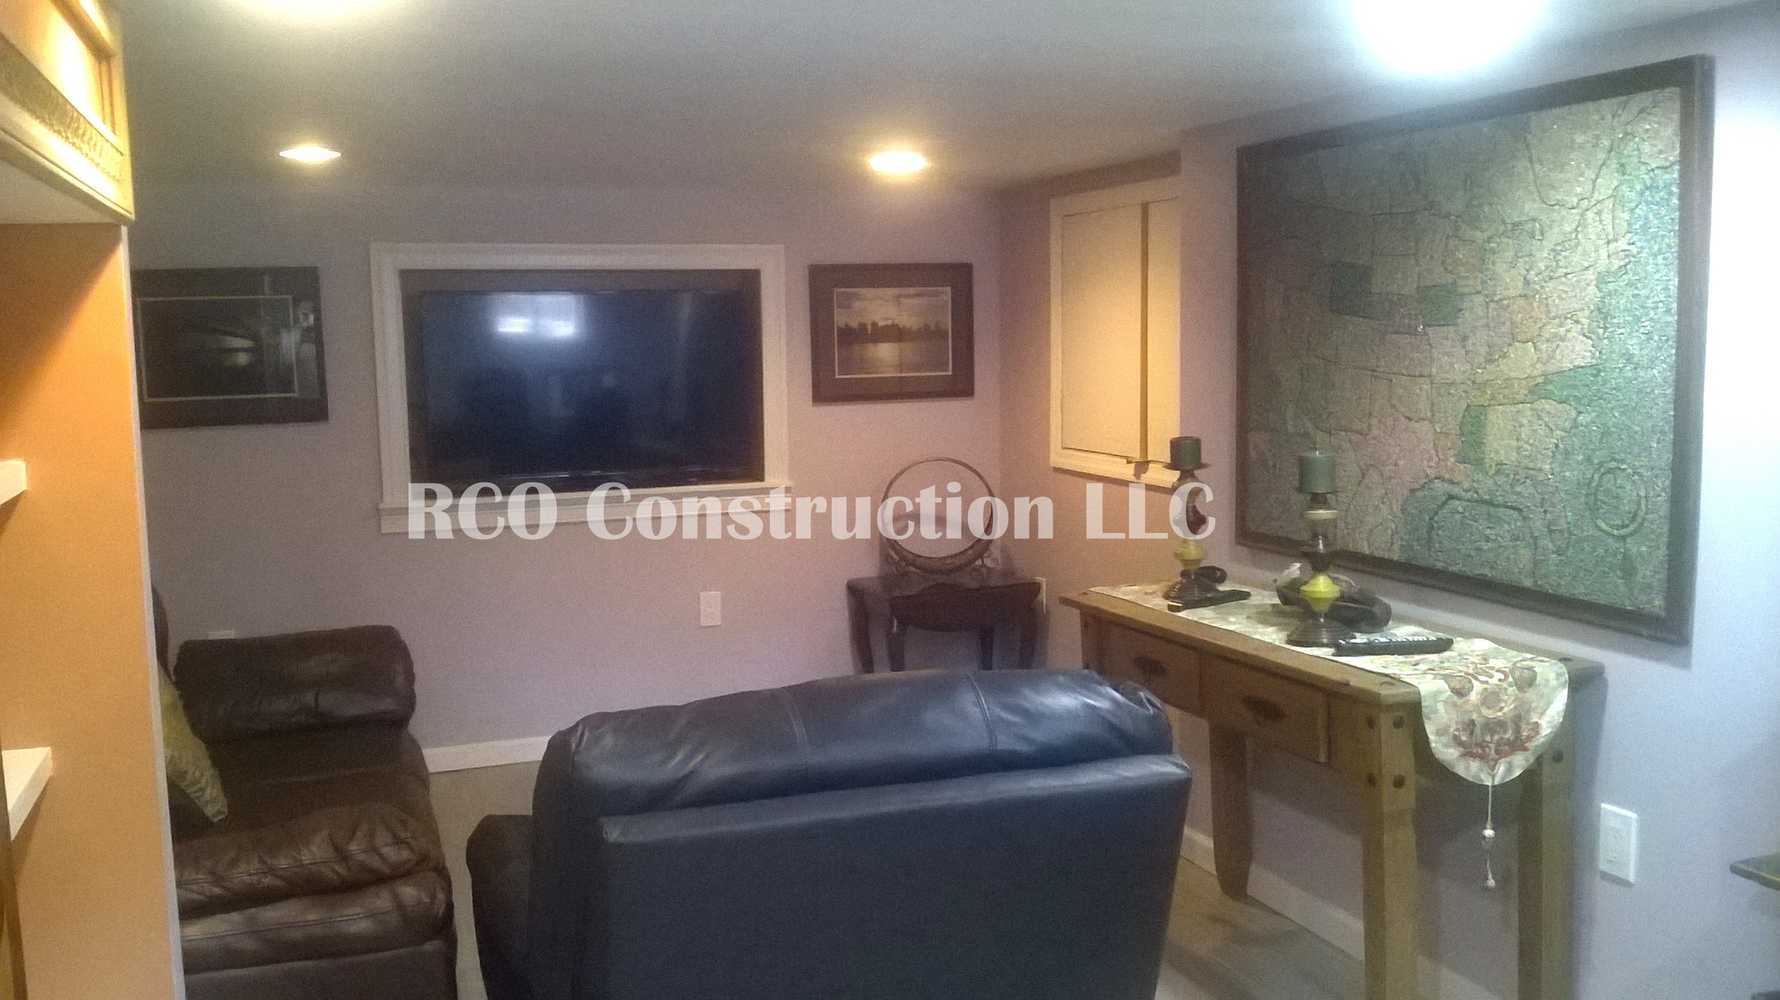 Photos from RCO CONSTRUCTION LLC